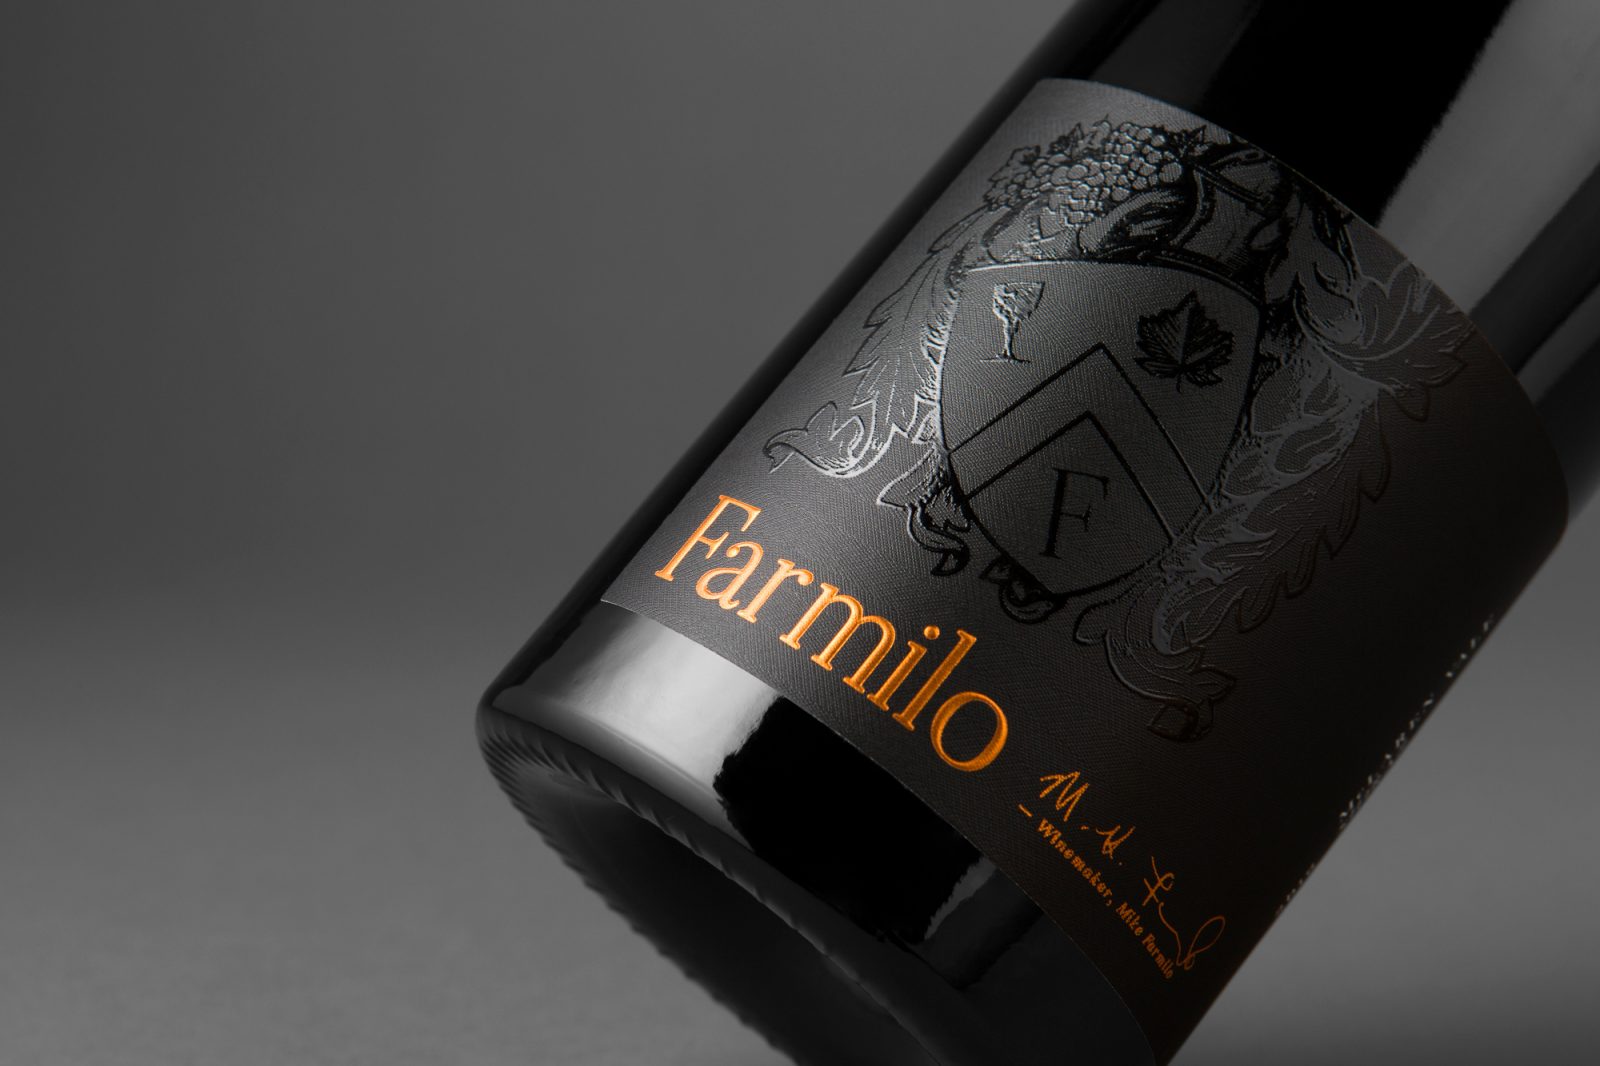 Packaging Design for McLaren Vale Shiraz from Farmilo Series of Wines